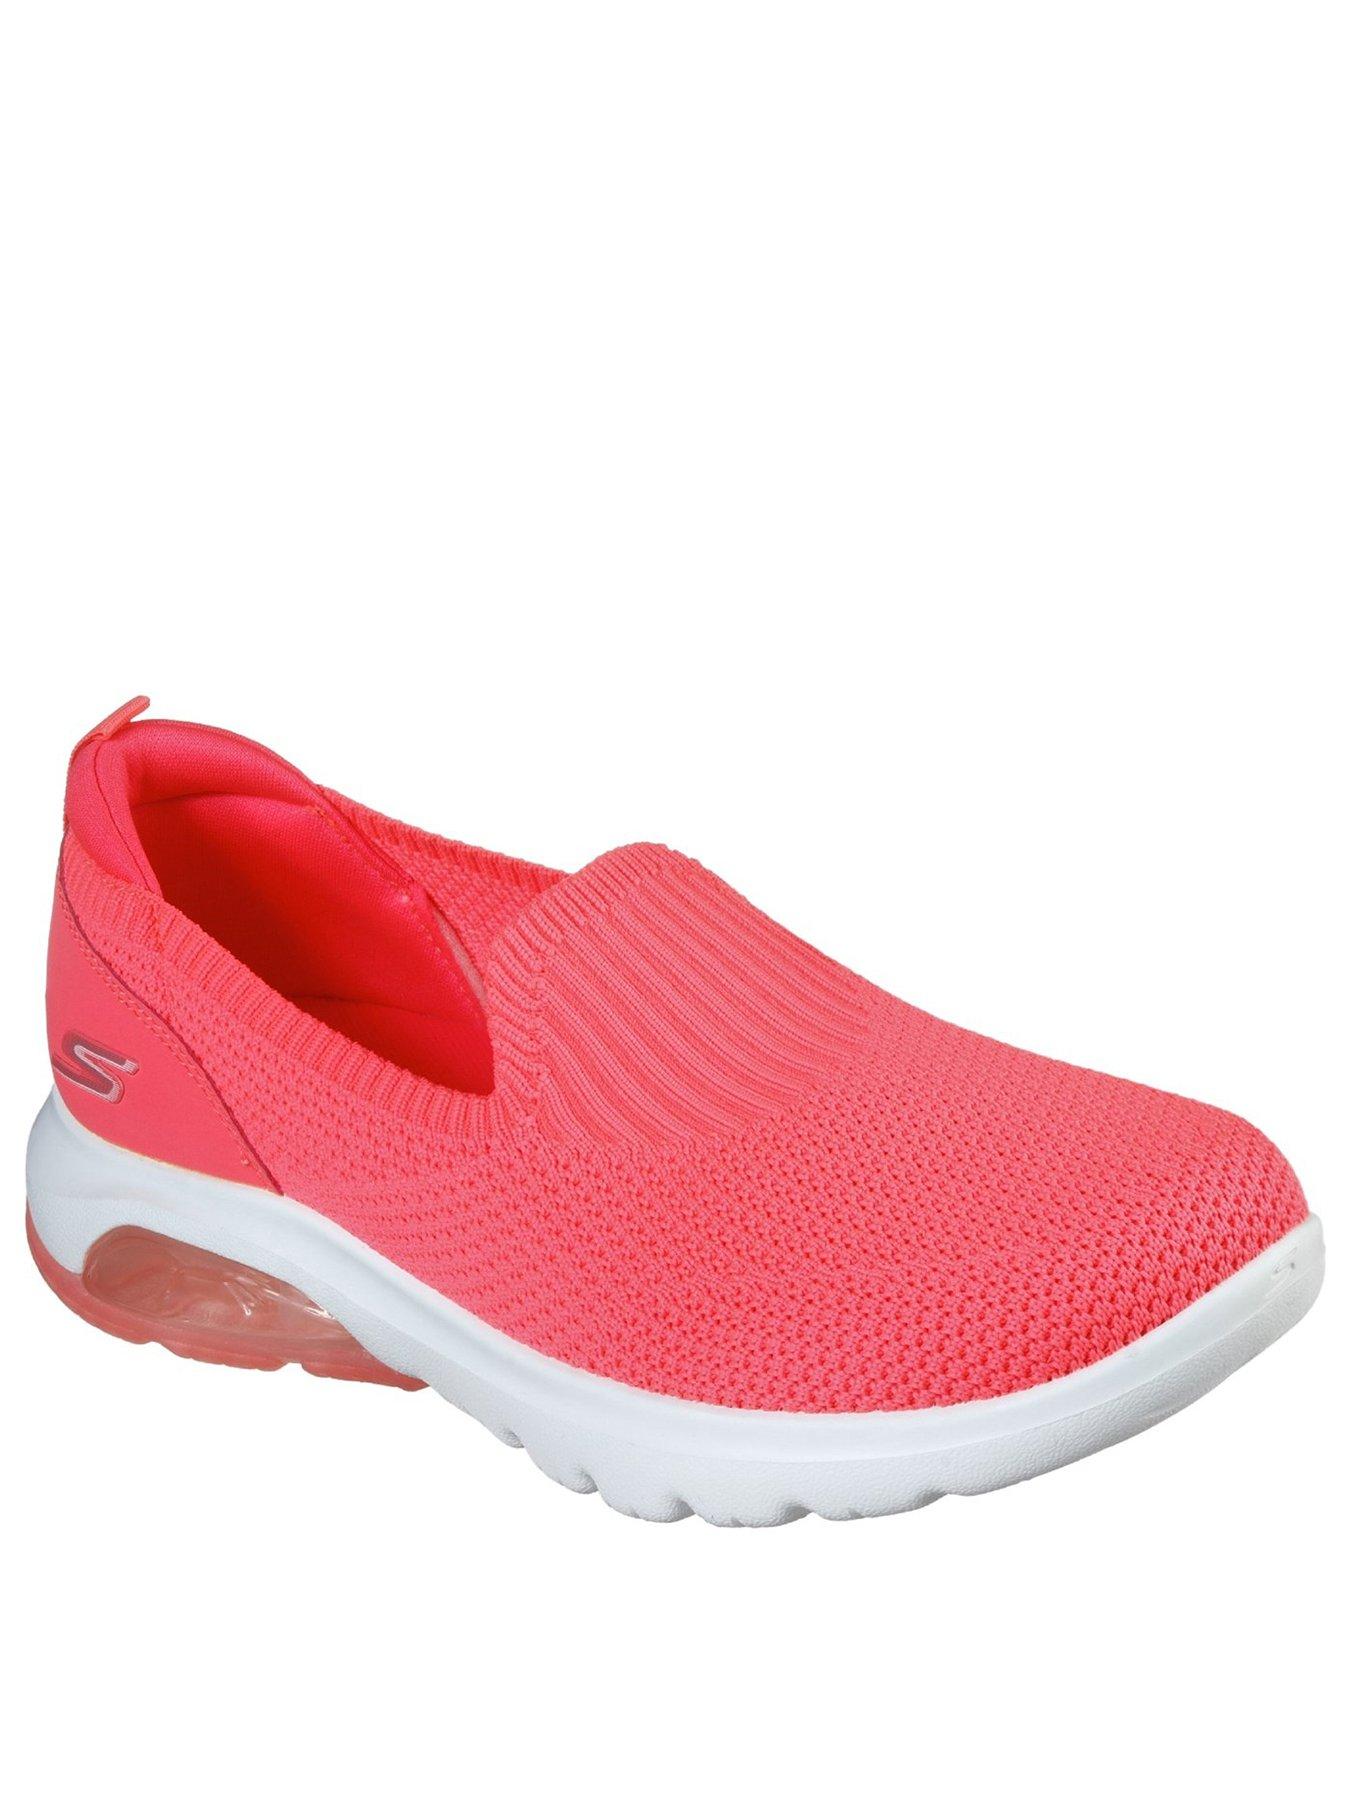 skechers on the go pink